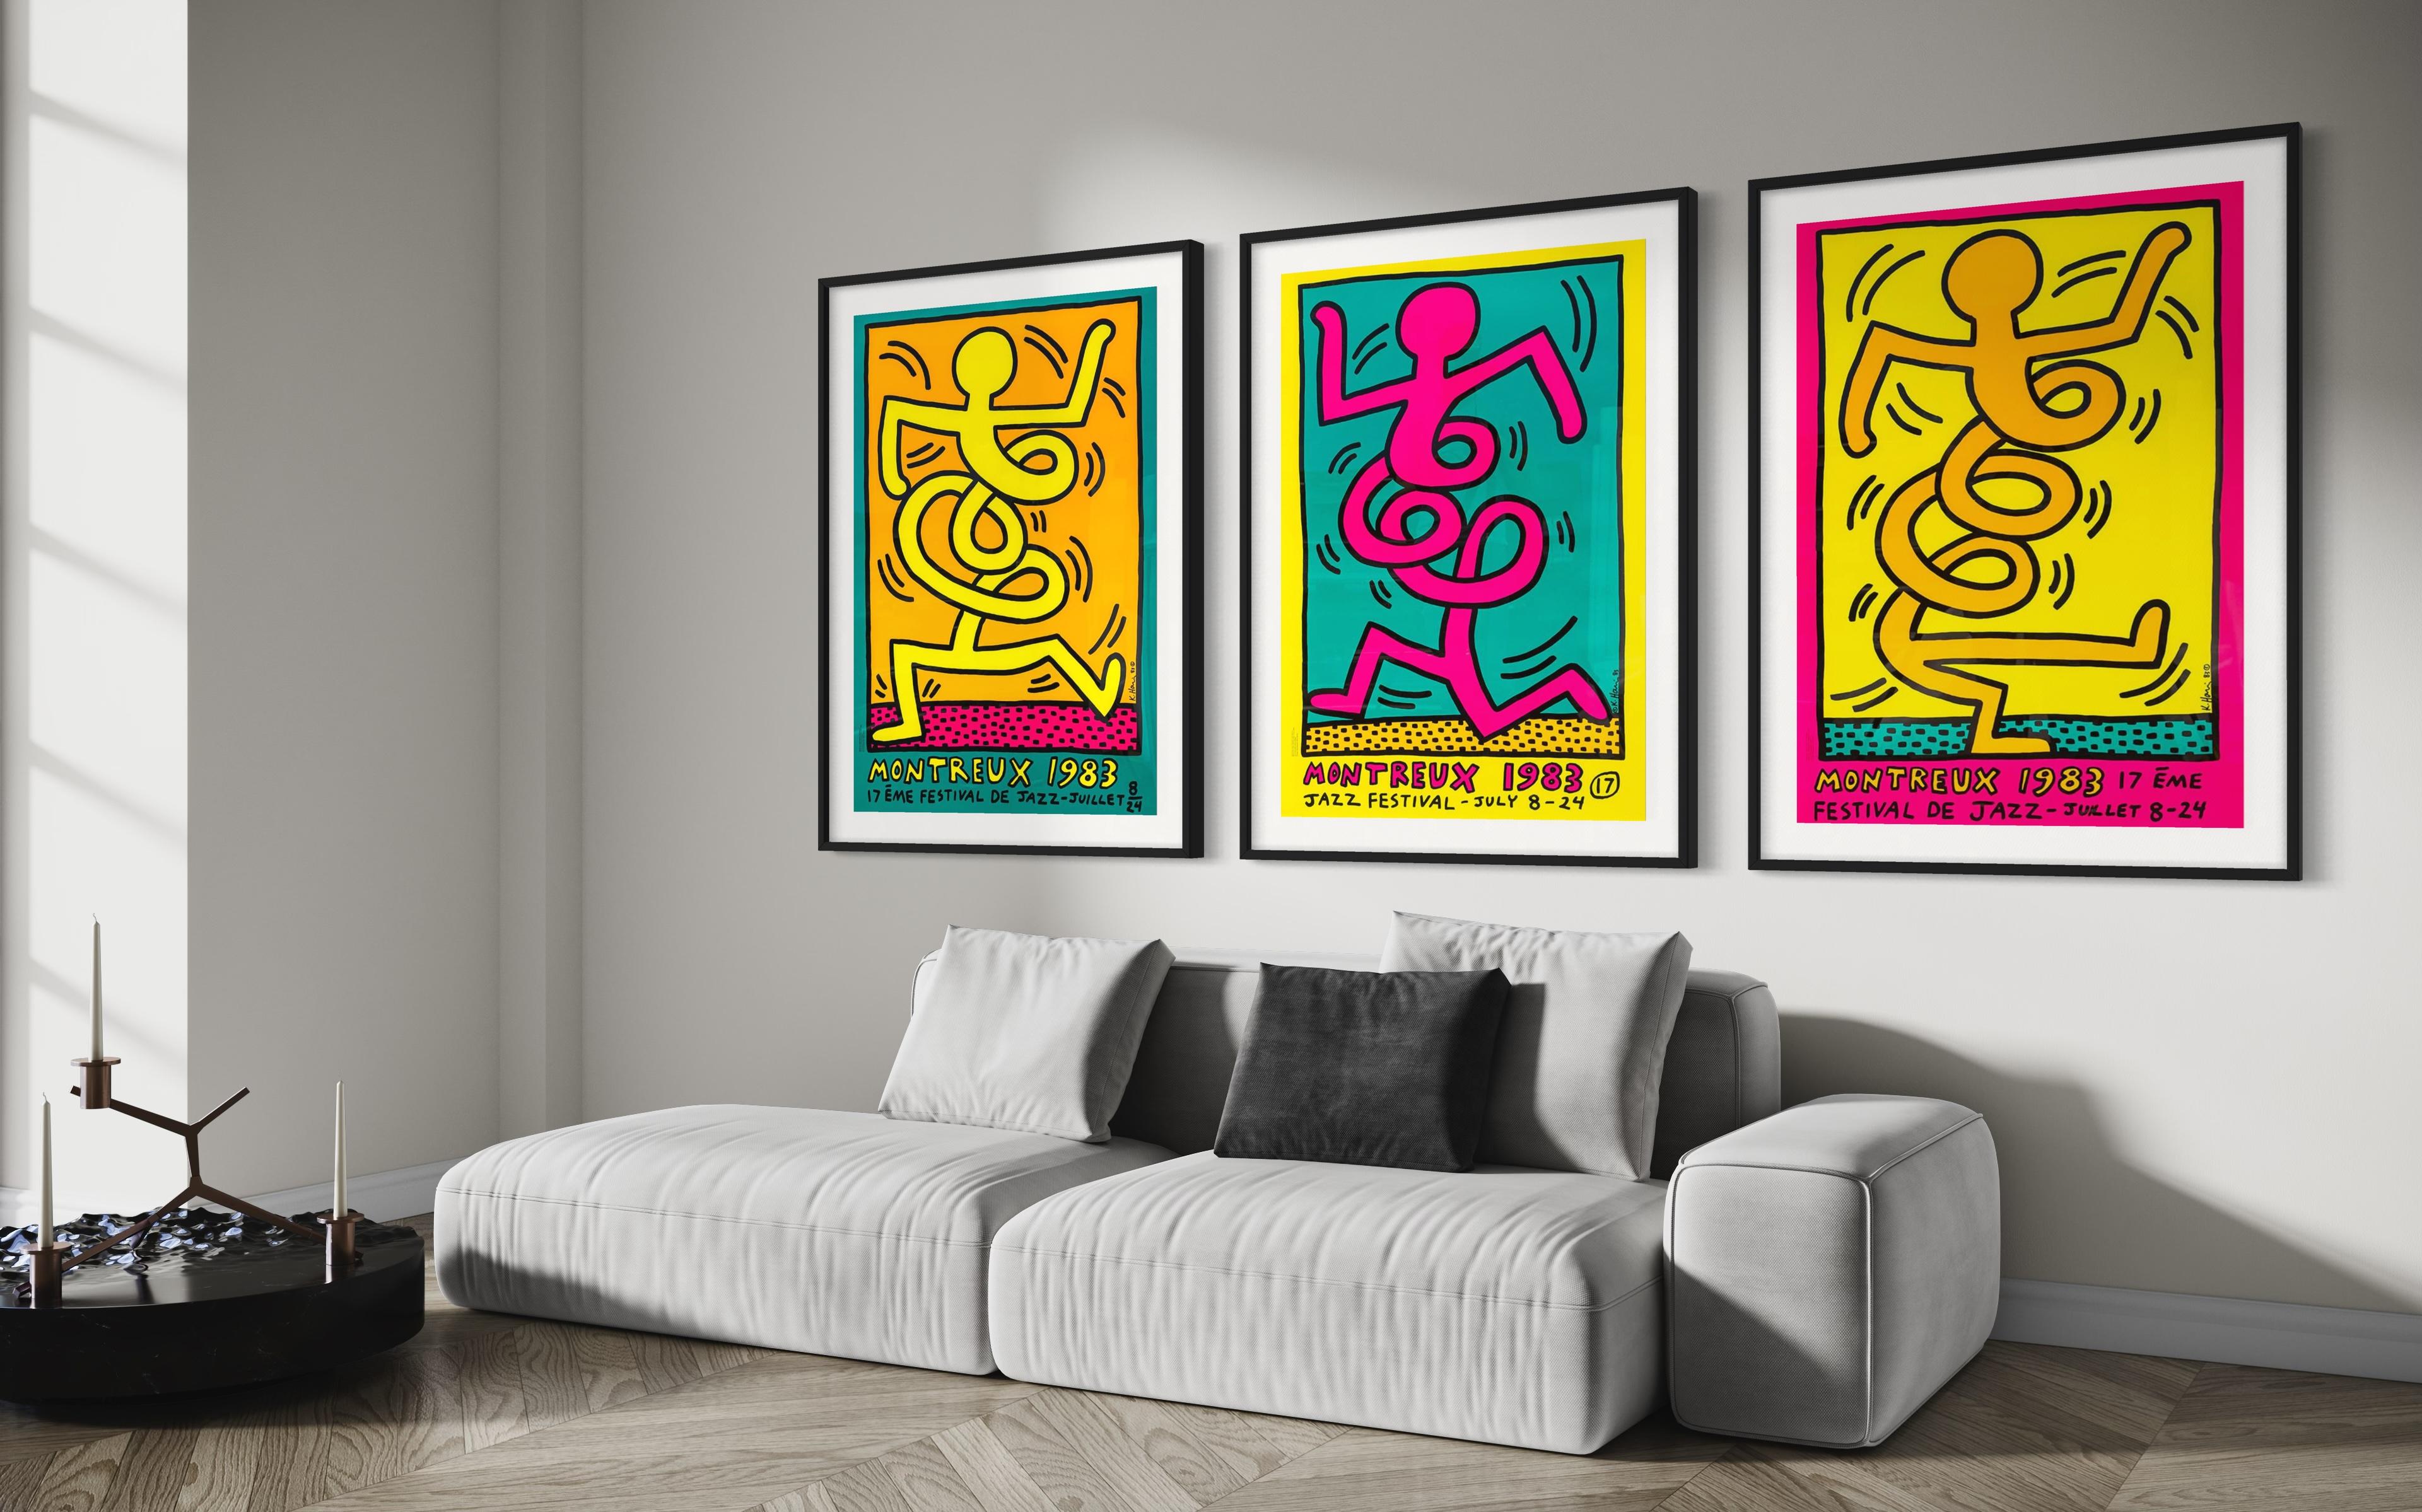 Montreux Jazz De Festival (Complete Set) - Street Art Print by Keith Haring